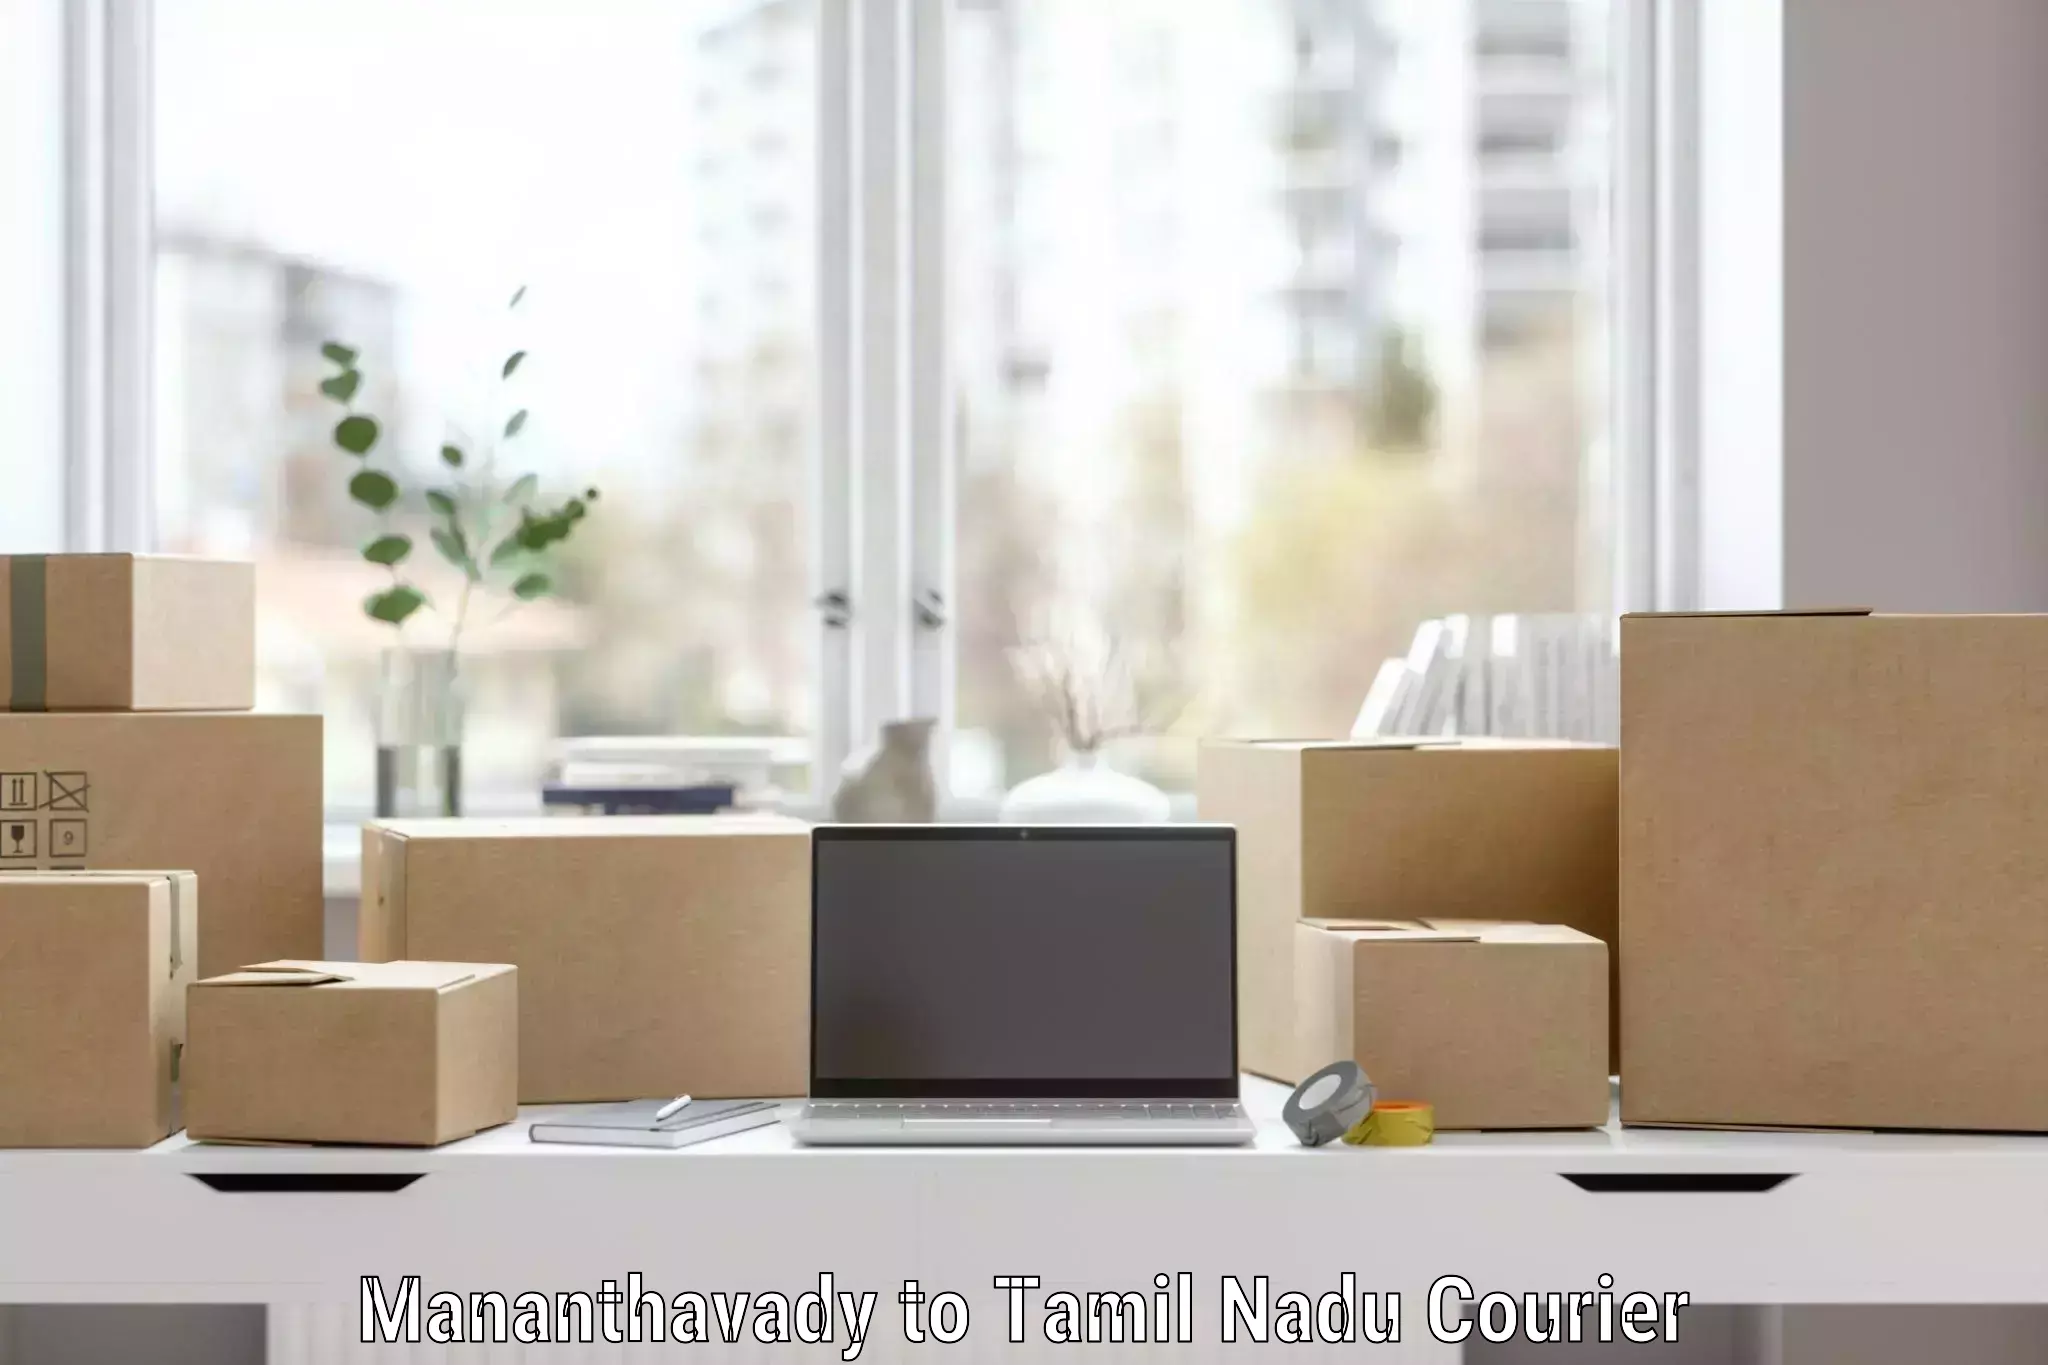 Professional moving assistance Mananthavady to Tamil Nadu